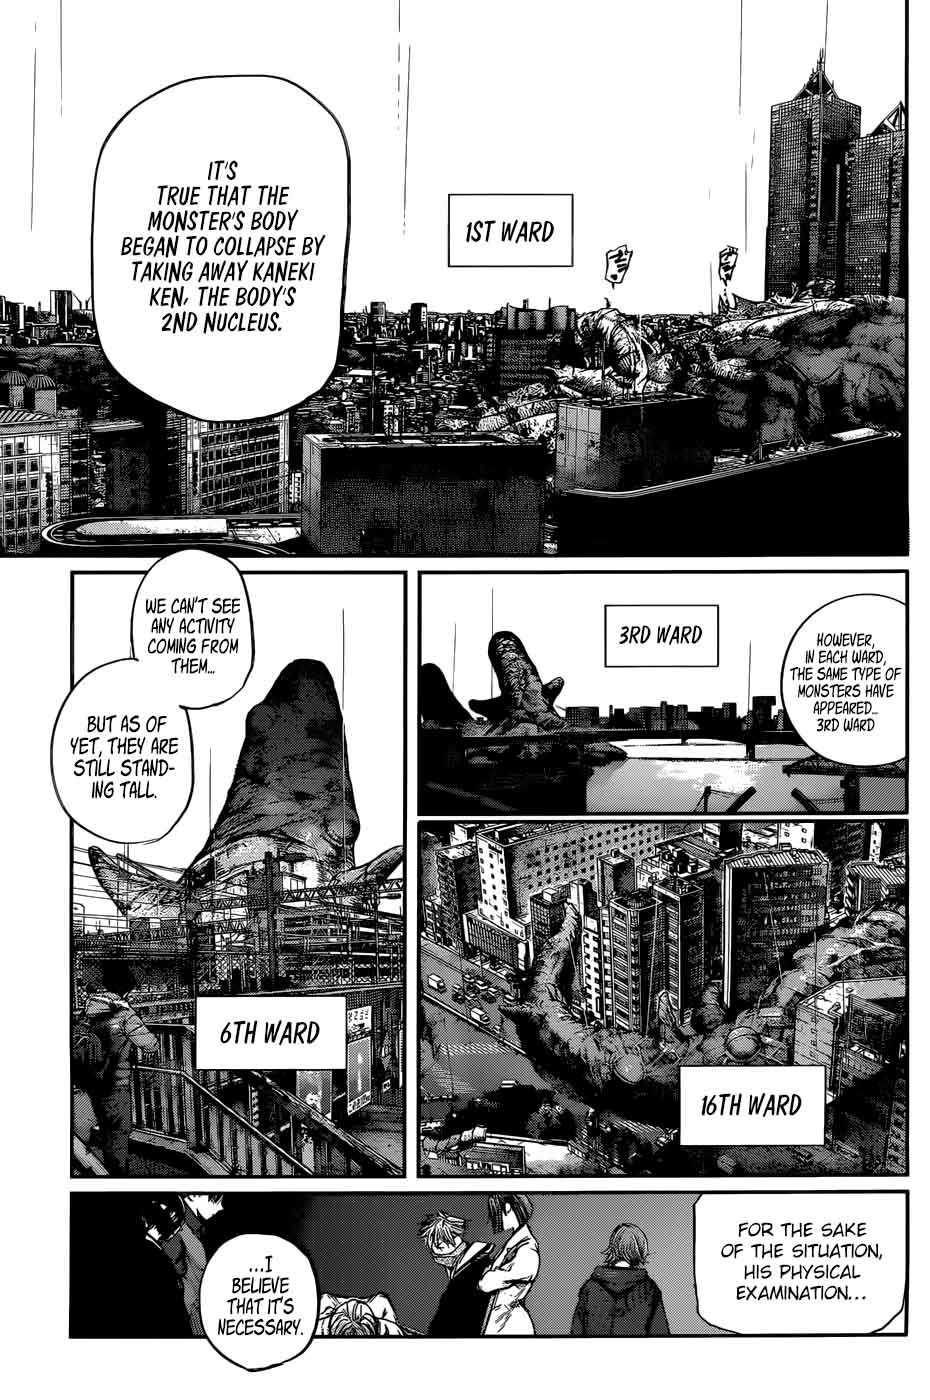 Tokyo Ghoul Re Chapter 162 Holding A Pomegranate Tokyo Ghoul Manga Online